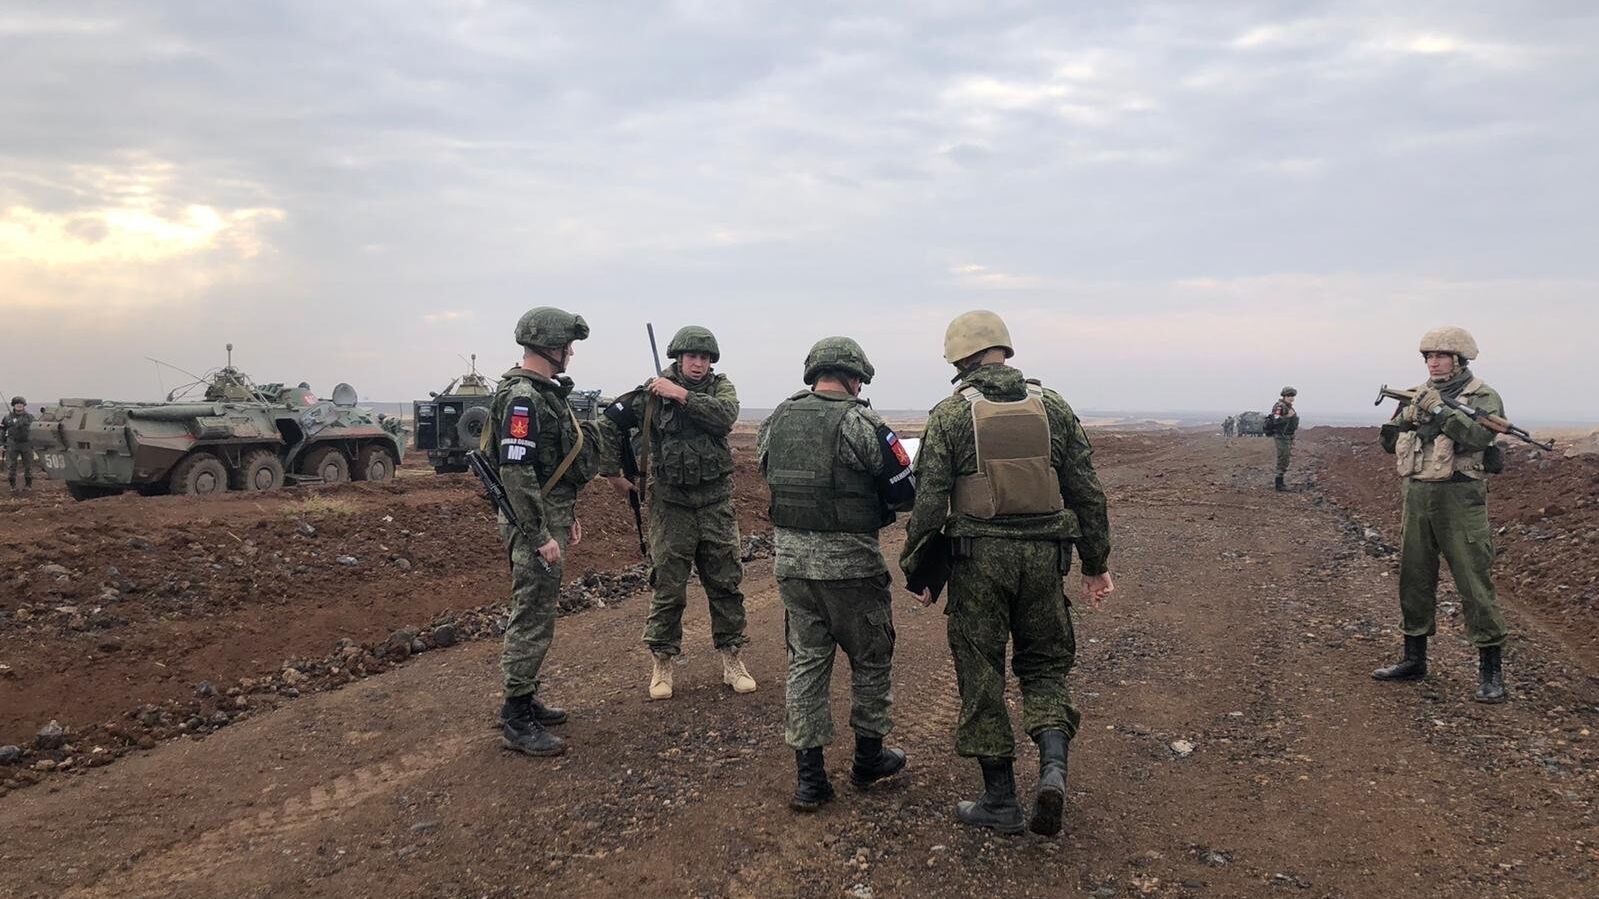 Syria news 11 April 06.00: The United States is transferring equipment to Syria, joint patrol of Turkey and the Russian Federation in Hasak